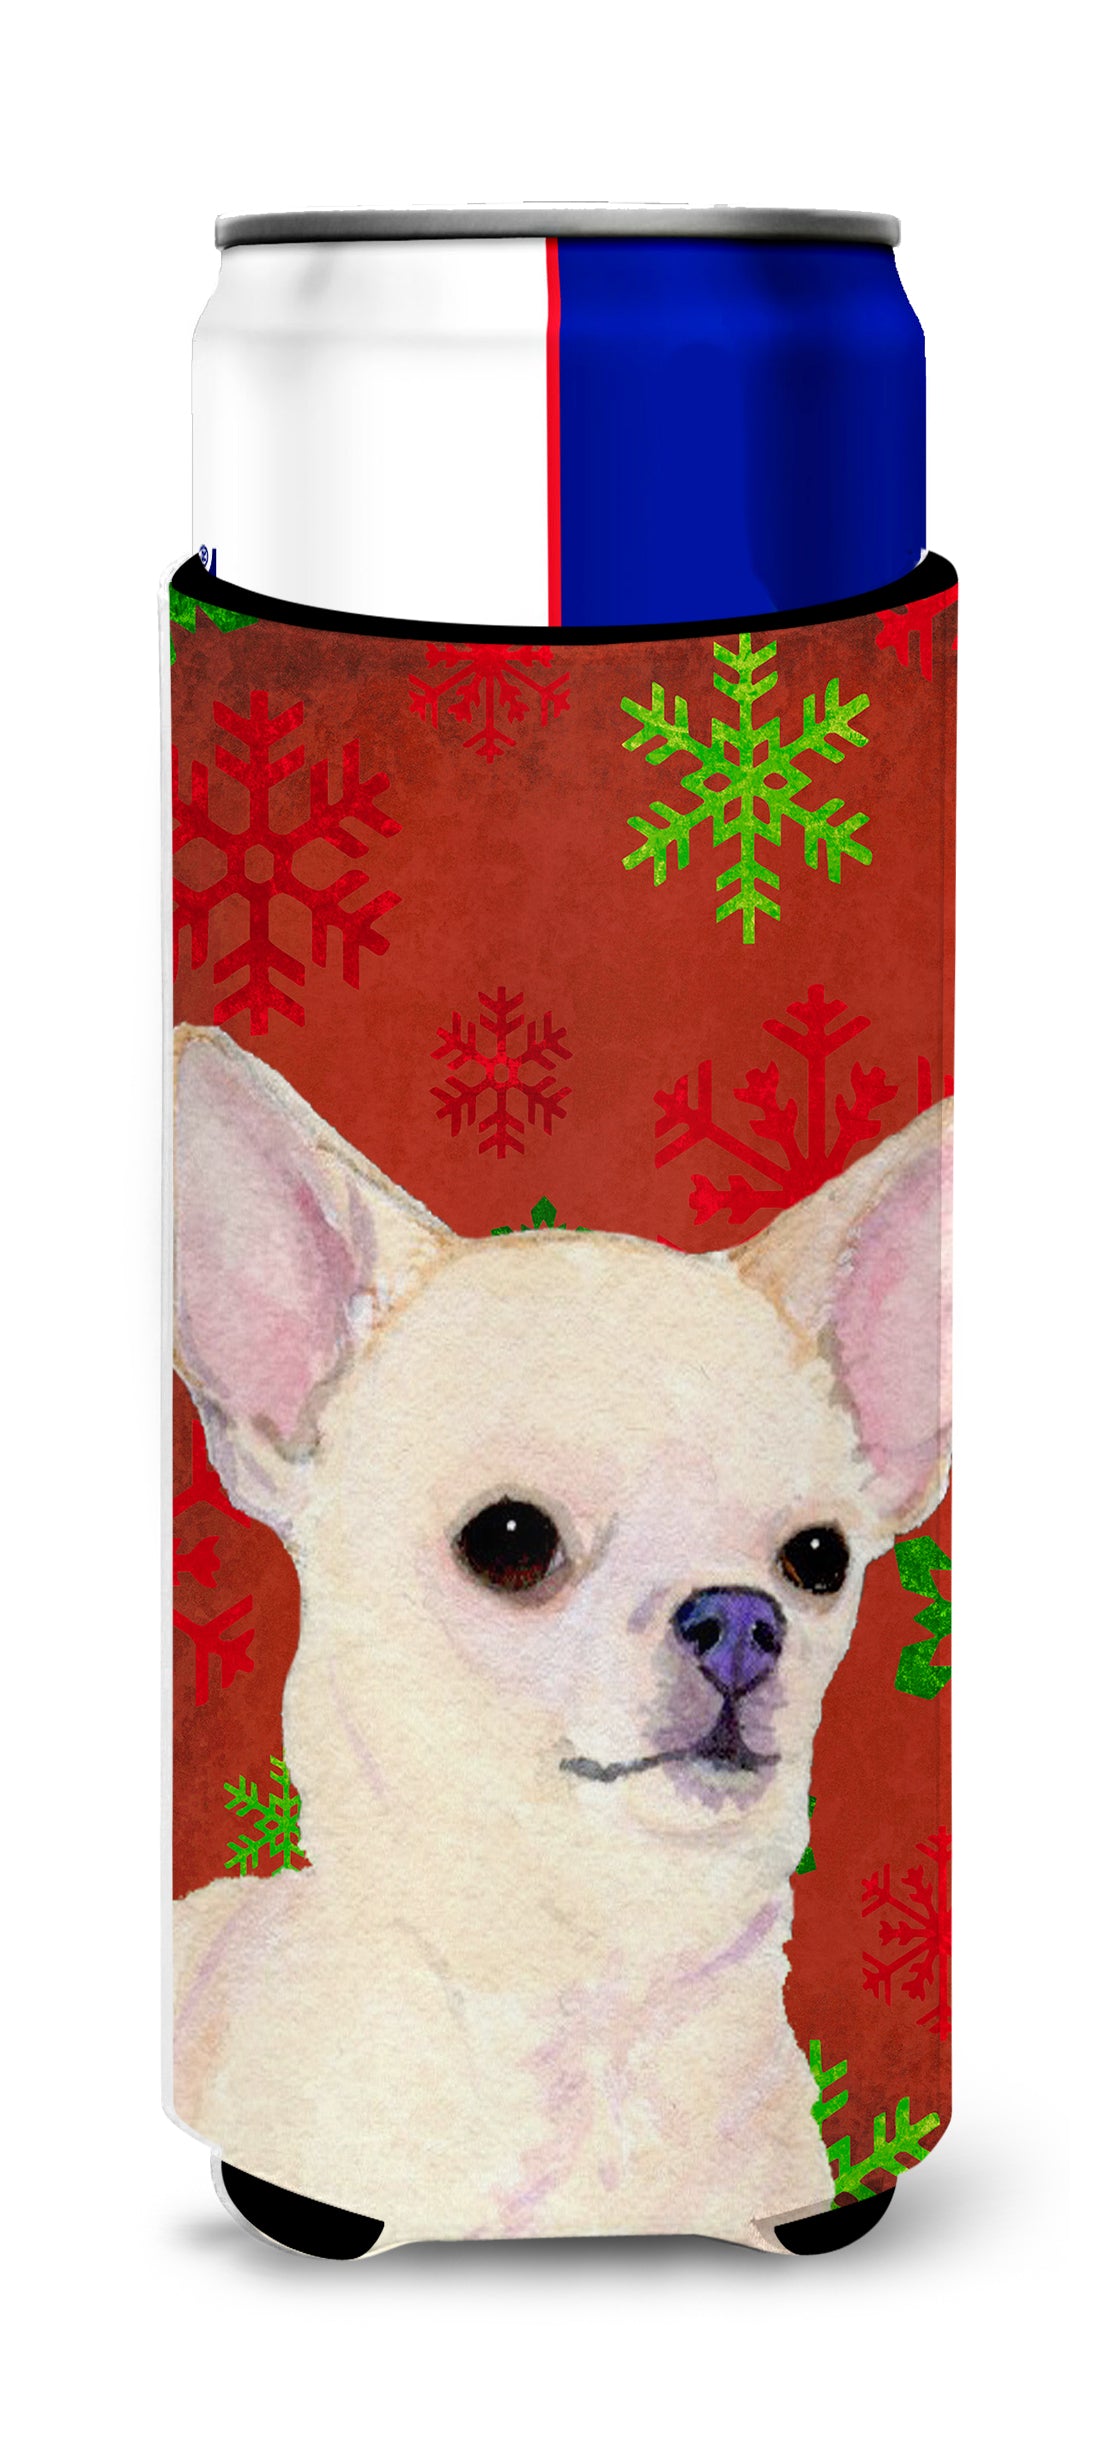 Chihuahua Red and Green Snowflakes Holiday Christmas Ultra Beverage Insulators for slim cans SS4679MUK.